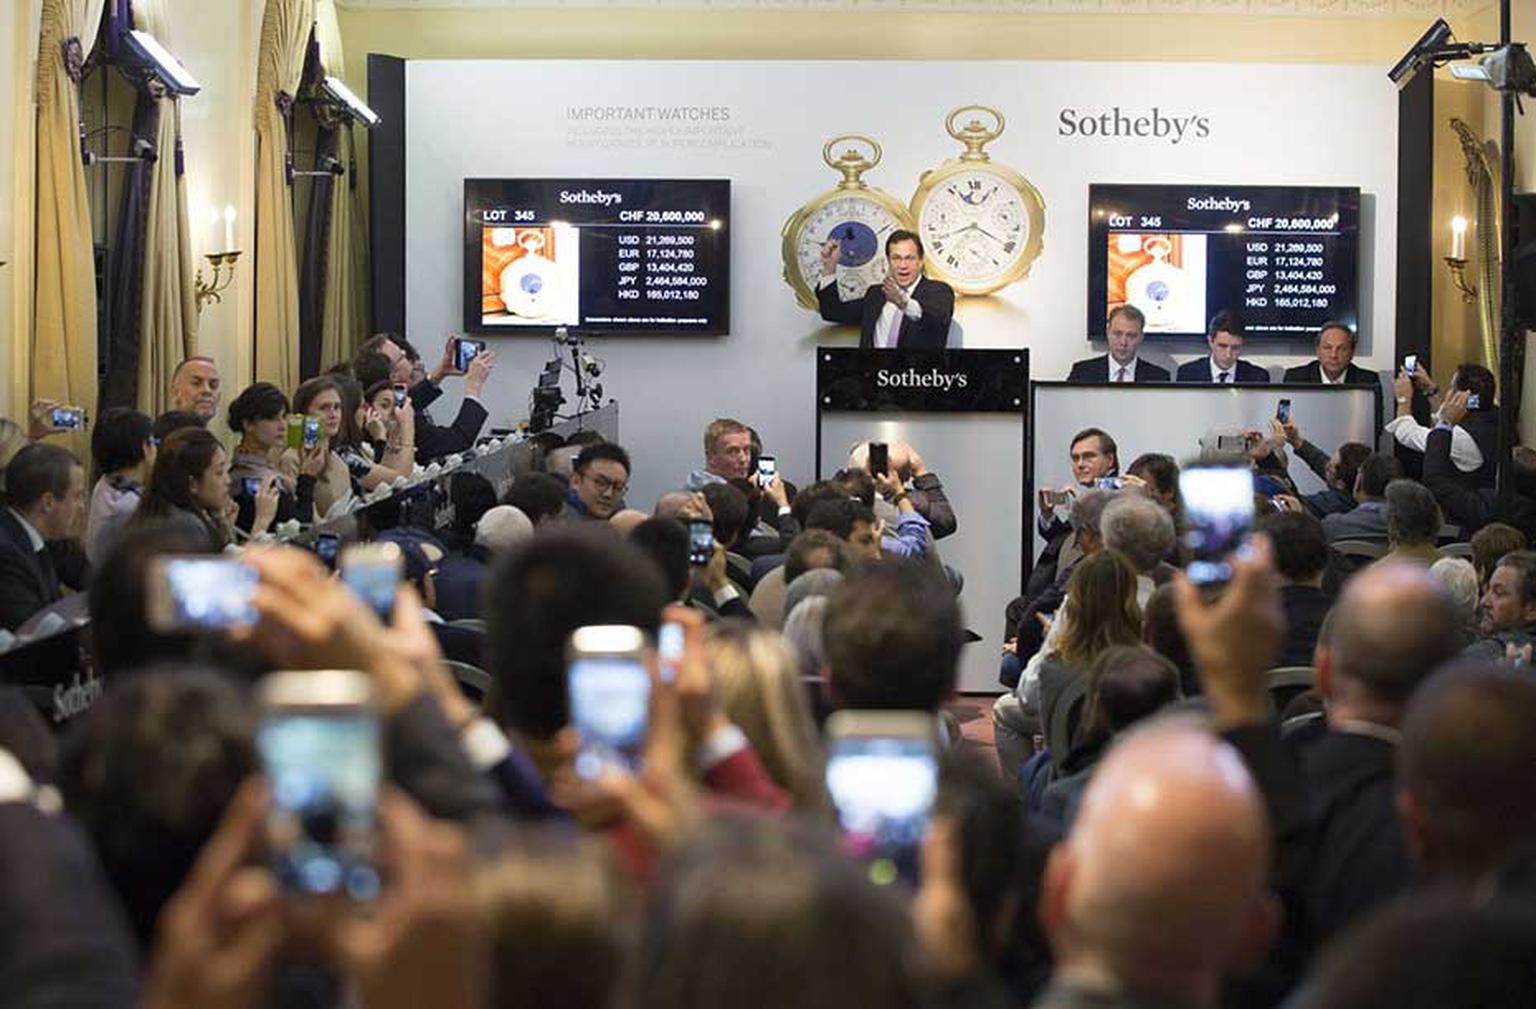 The room at Sotheby's Geneva auction house erupted into wild cheering and applause as auctioneer and consultant Aurel Bacs, who spent most of the sale consulting somebody by phone, secured the Graves Supercomplication pocket watch for $24 million, making 